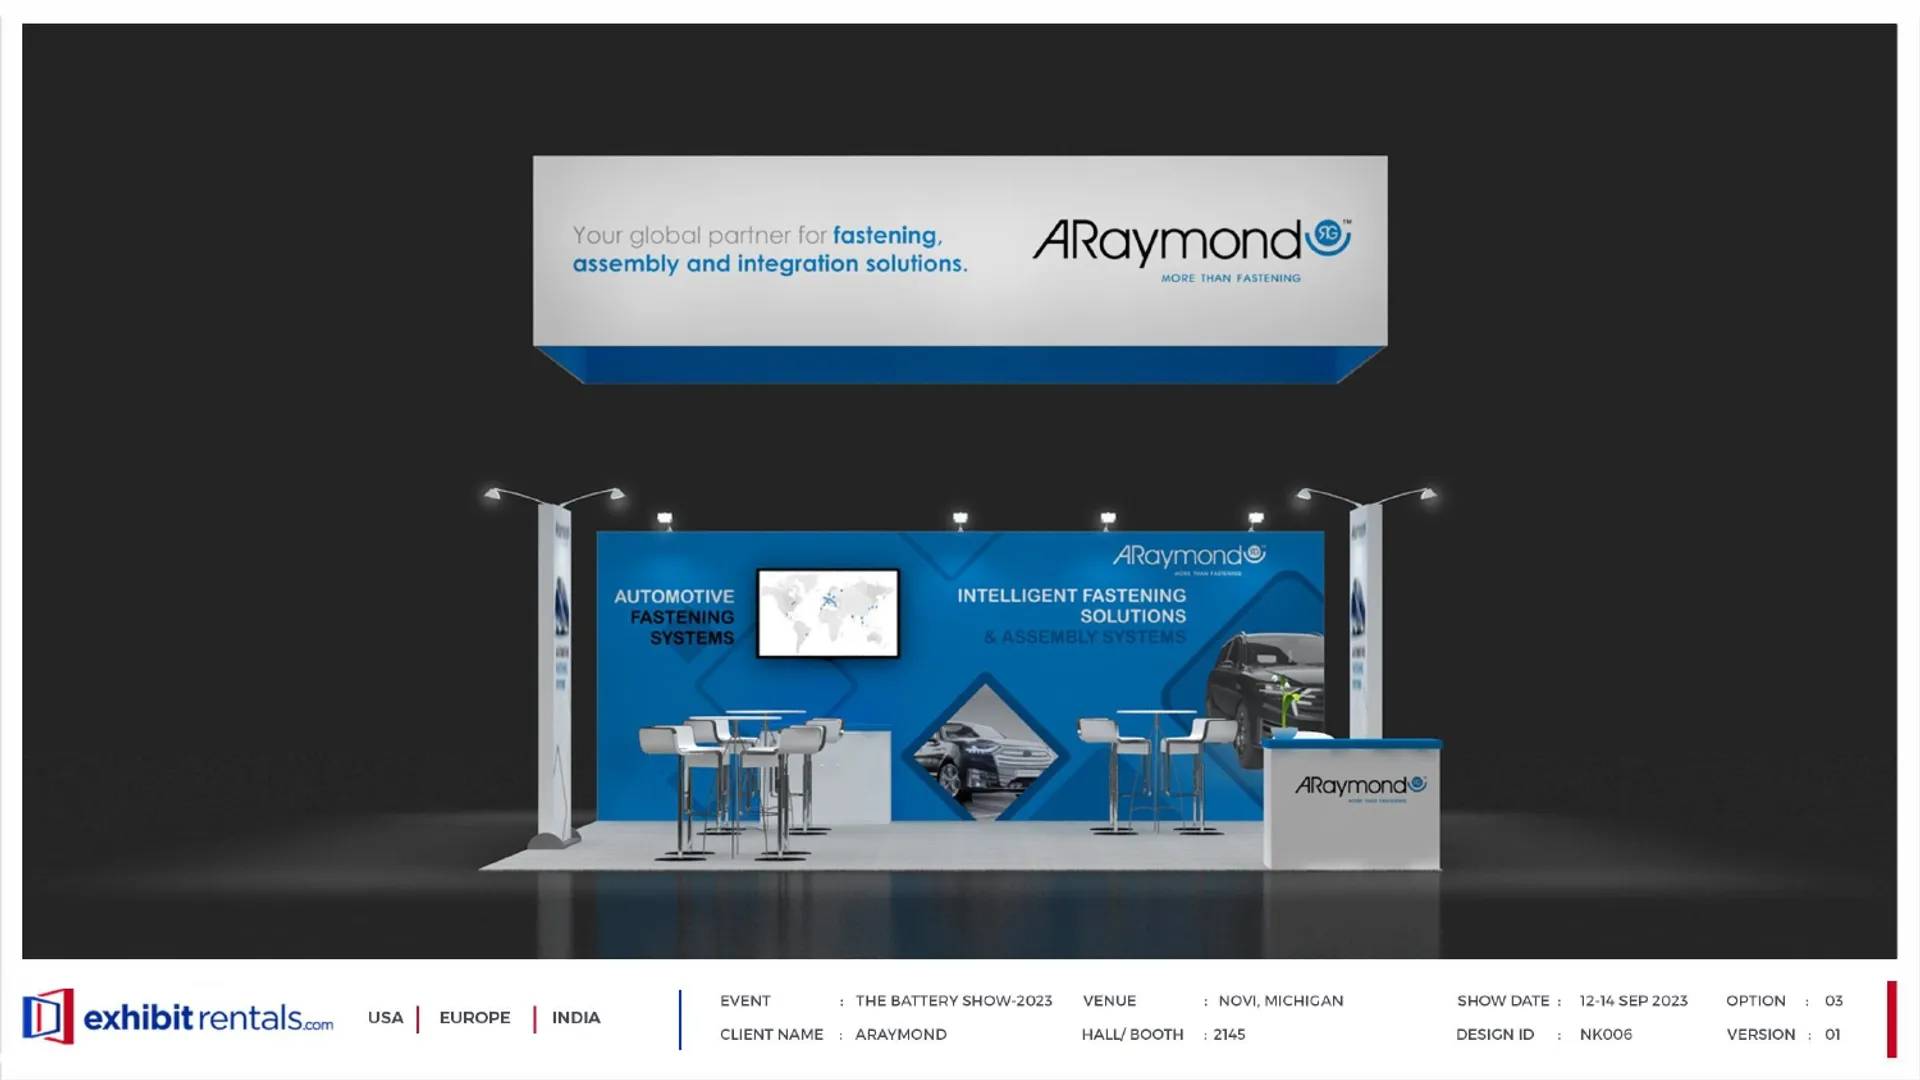 booth-design-projects/Exhibit-Rentals/2024-04-18-20x20-PENINSULA-Project-88/3.1_ARaymond_The Battery Show_ER Design presentation-12_page-0001-0dpx0q.jpg